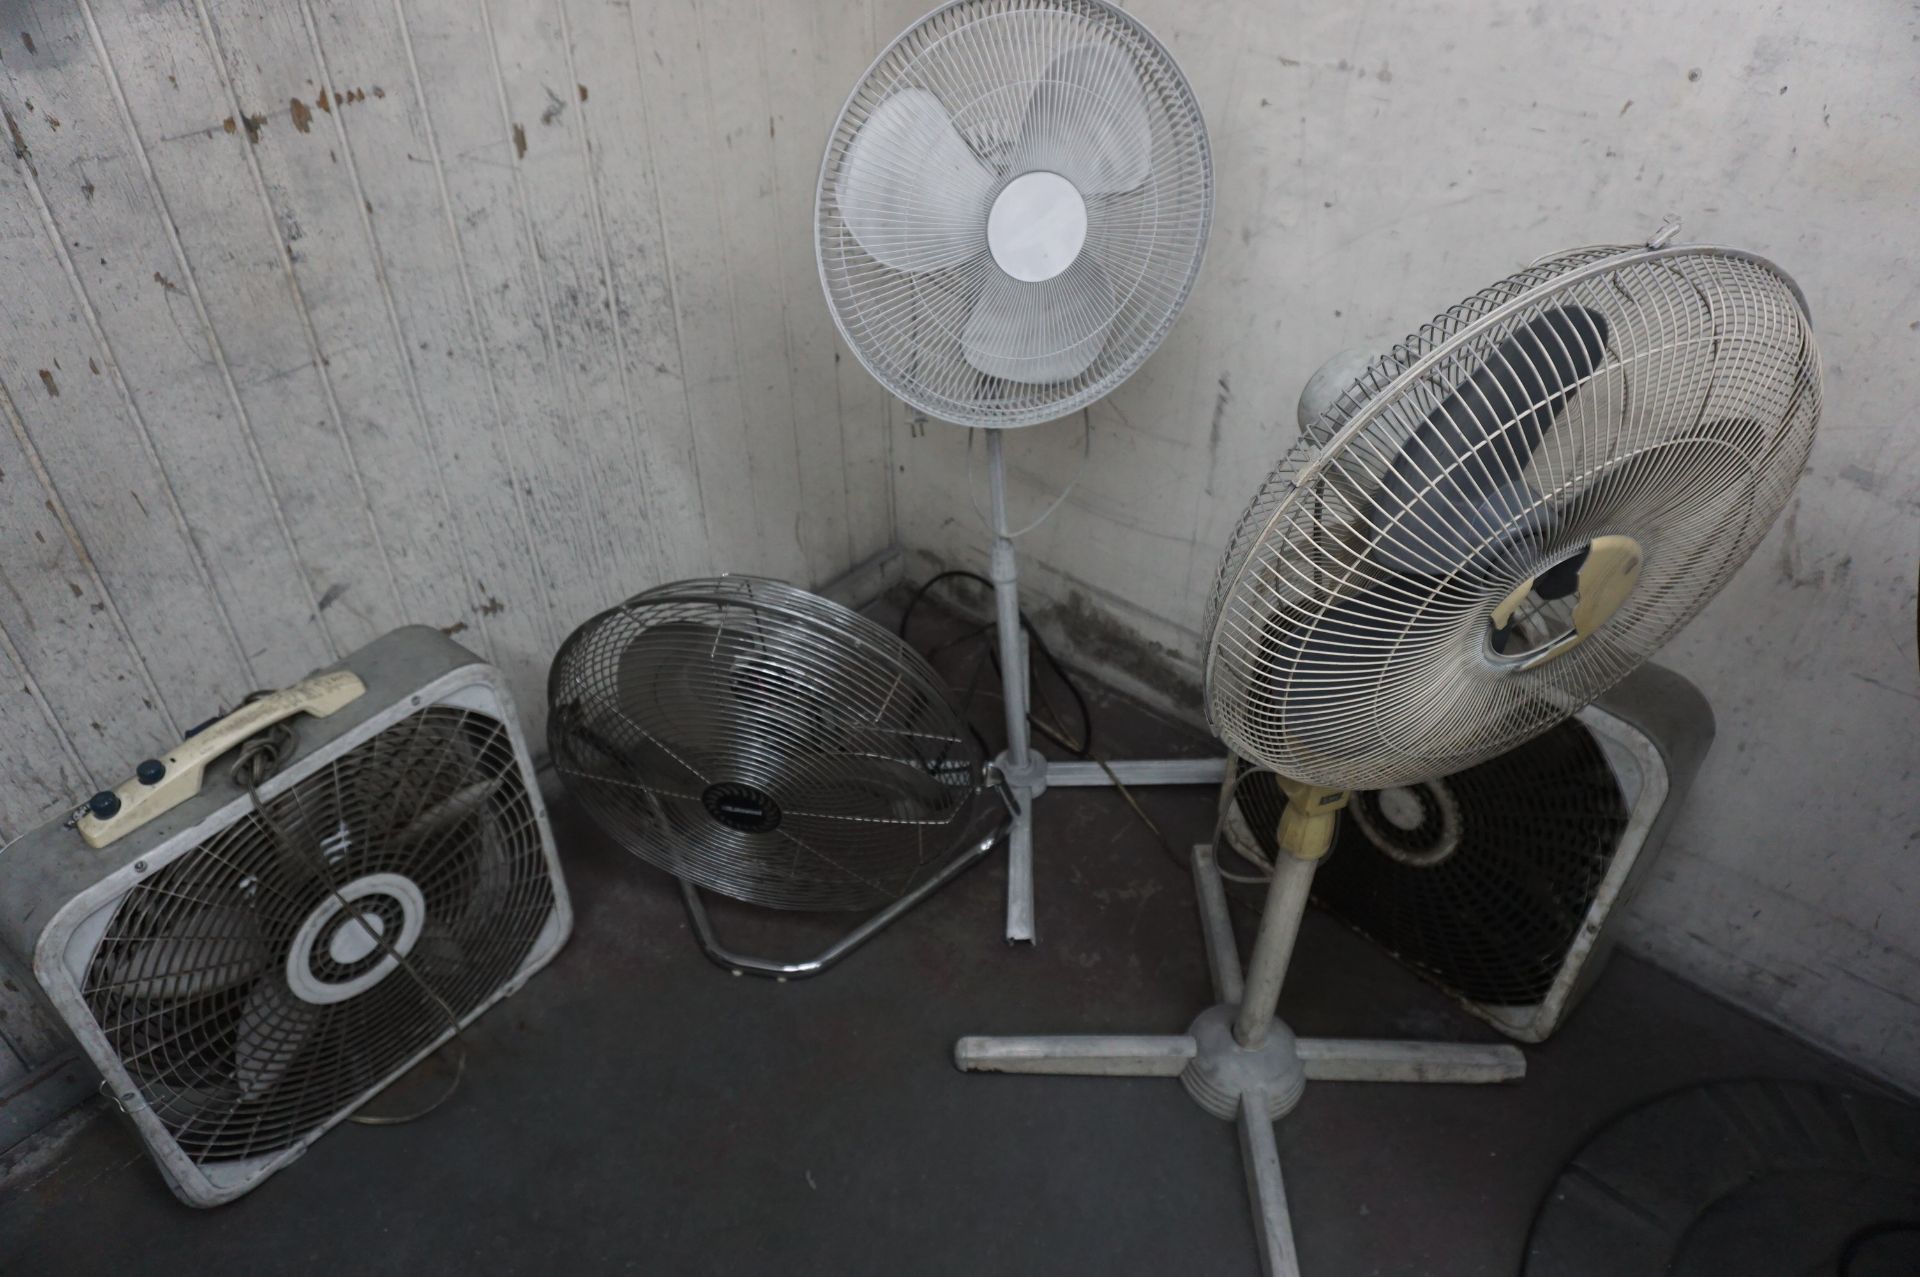 FAN LOT TO INCLUDE BUT NOT LIMITED TO: DAYTON INDUSTRIAL FAN, BIONAIRE TOWER FAN, HONEYWELL TOWER - Image 5 of 5